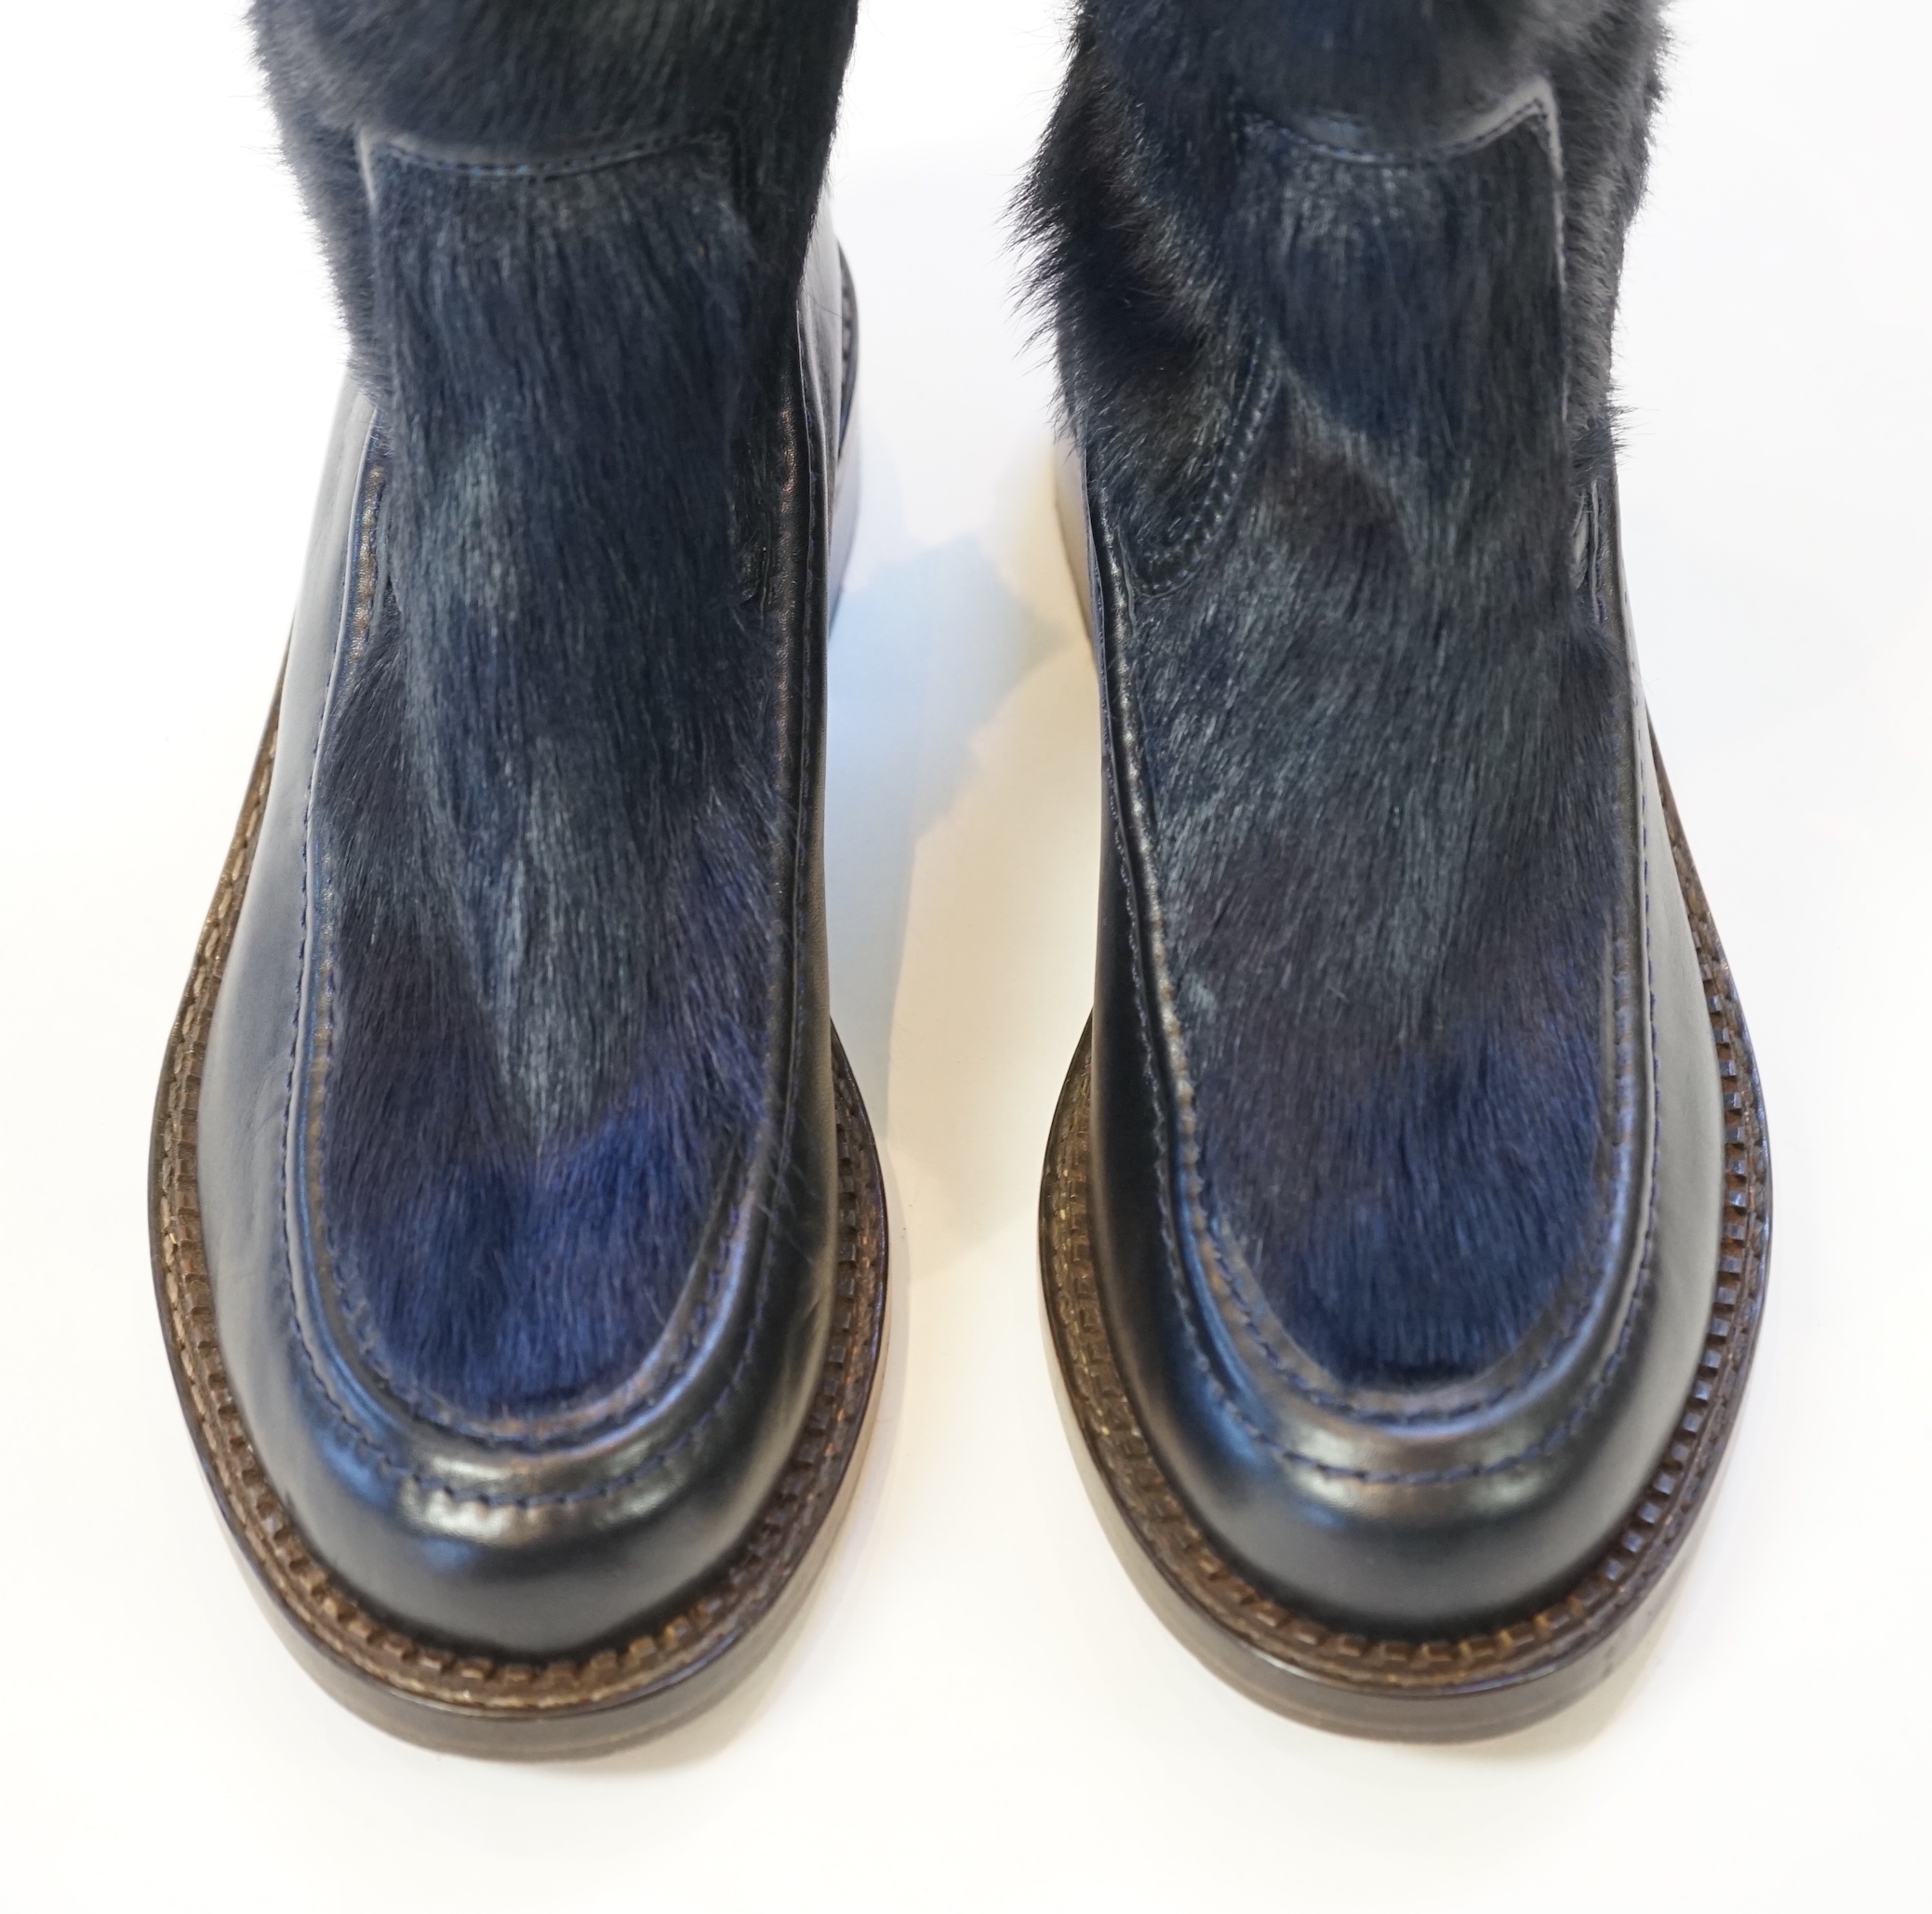 A pair of Chanel lady's navy blue leather calf hair pleated belted buckle boots, size EU 40.5